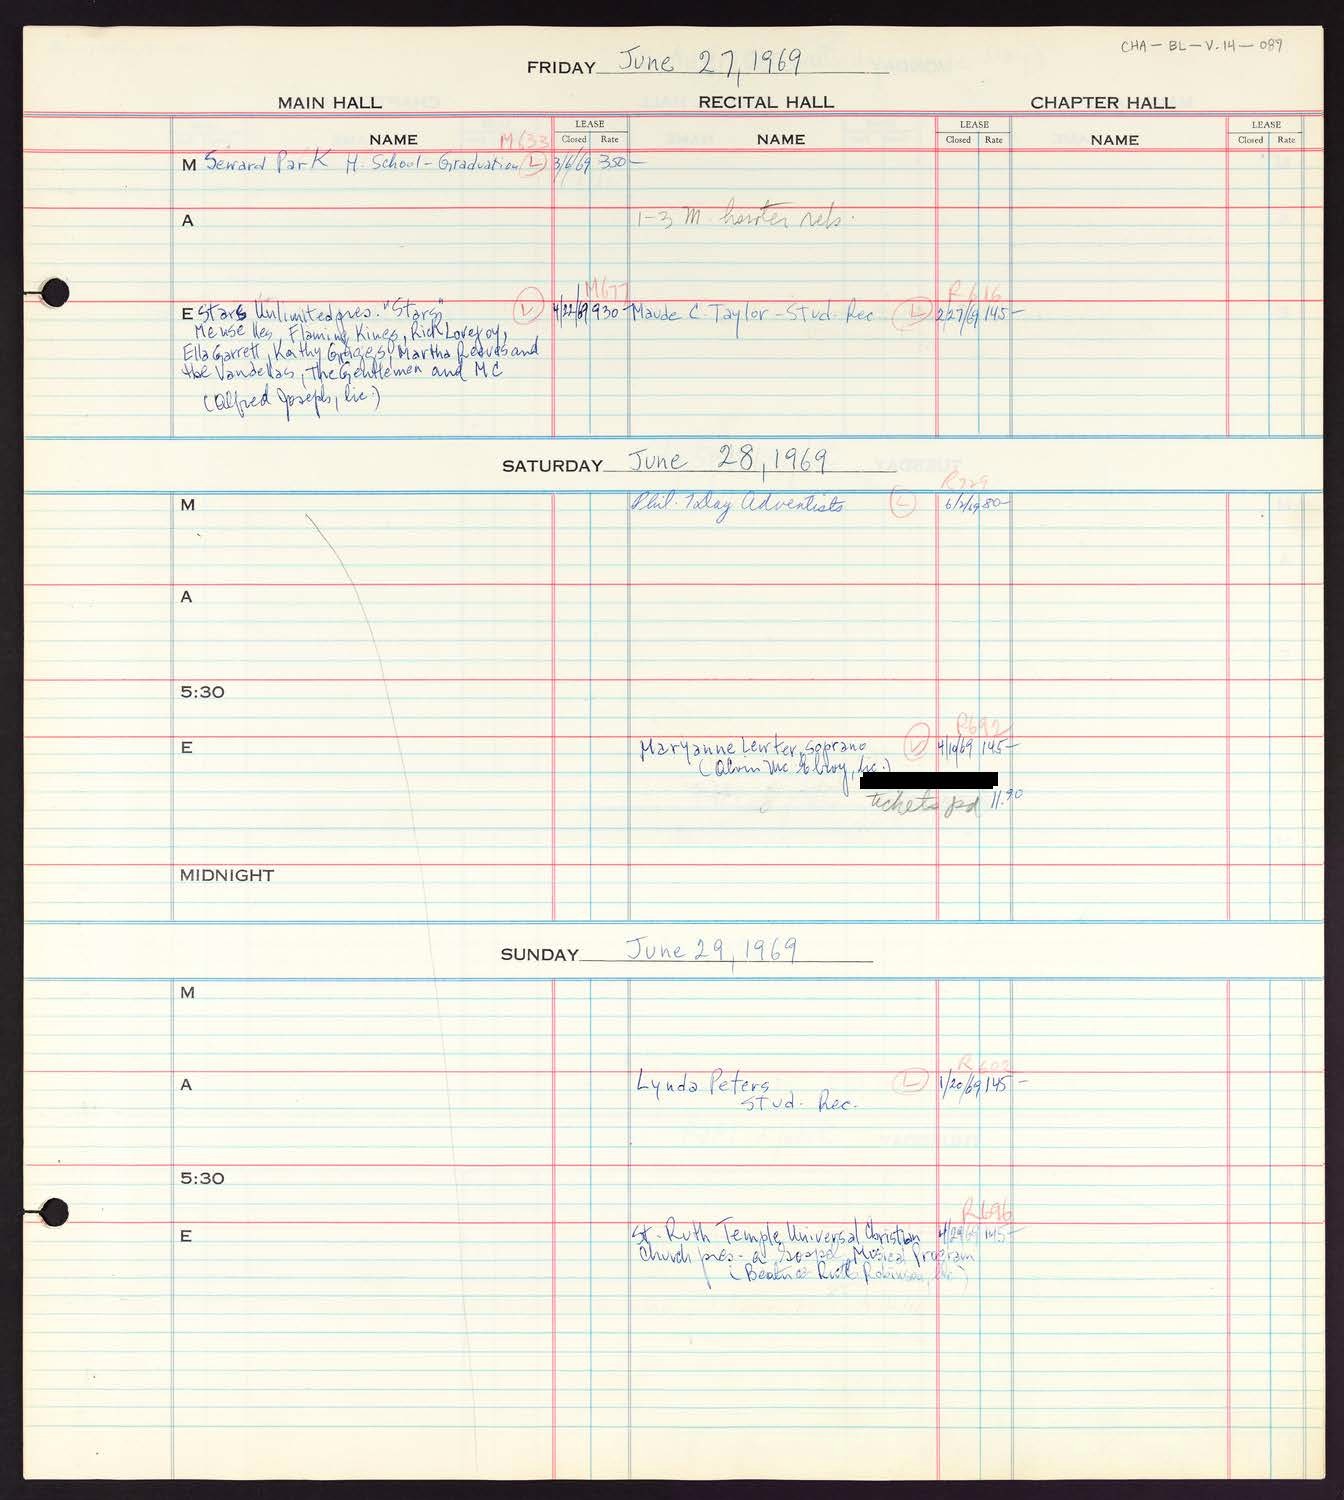 Carnegie Hall Booking Ledger, volume 14, page 87